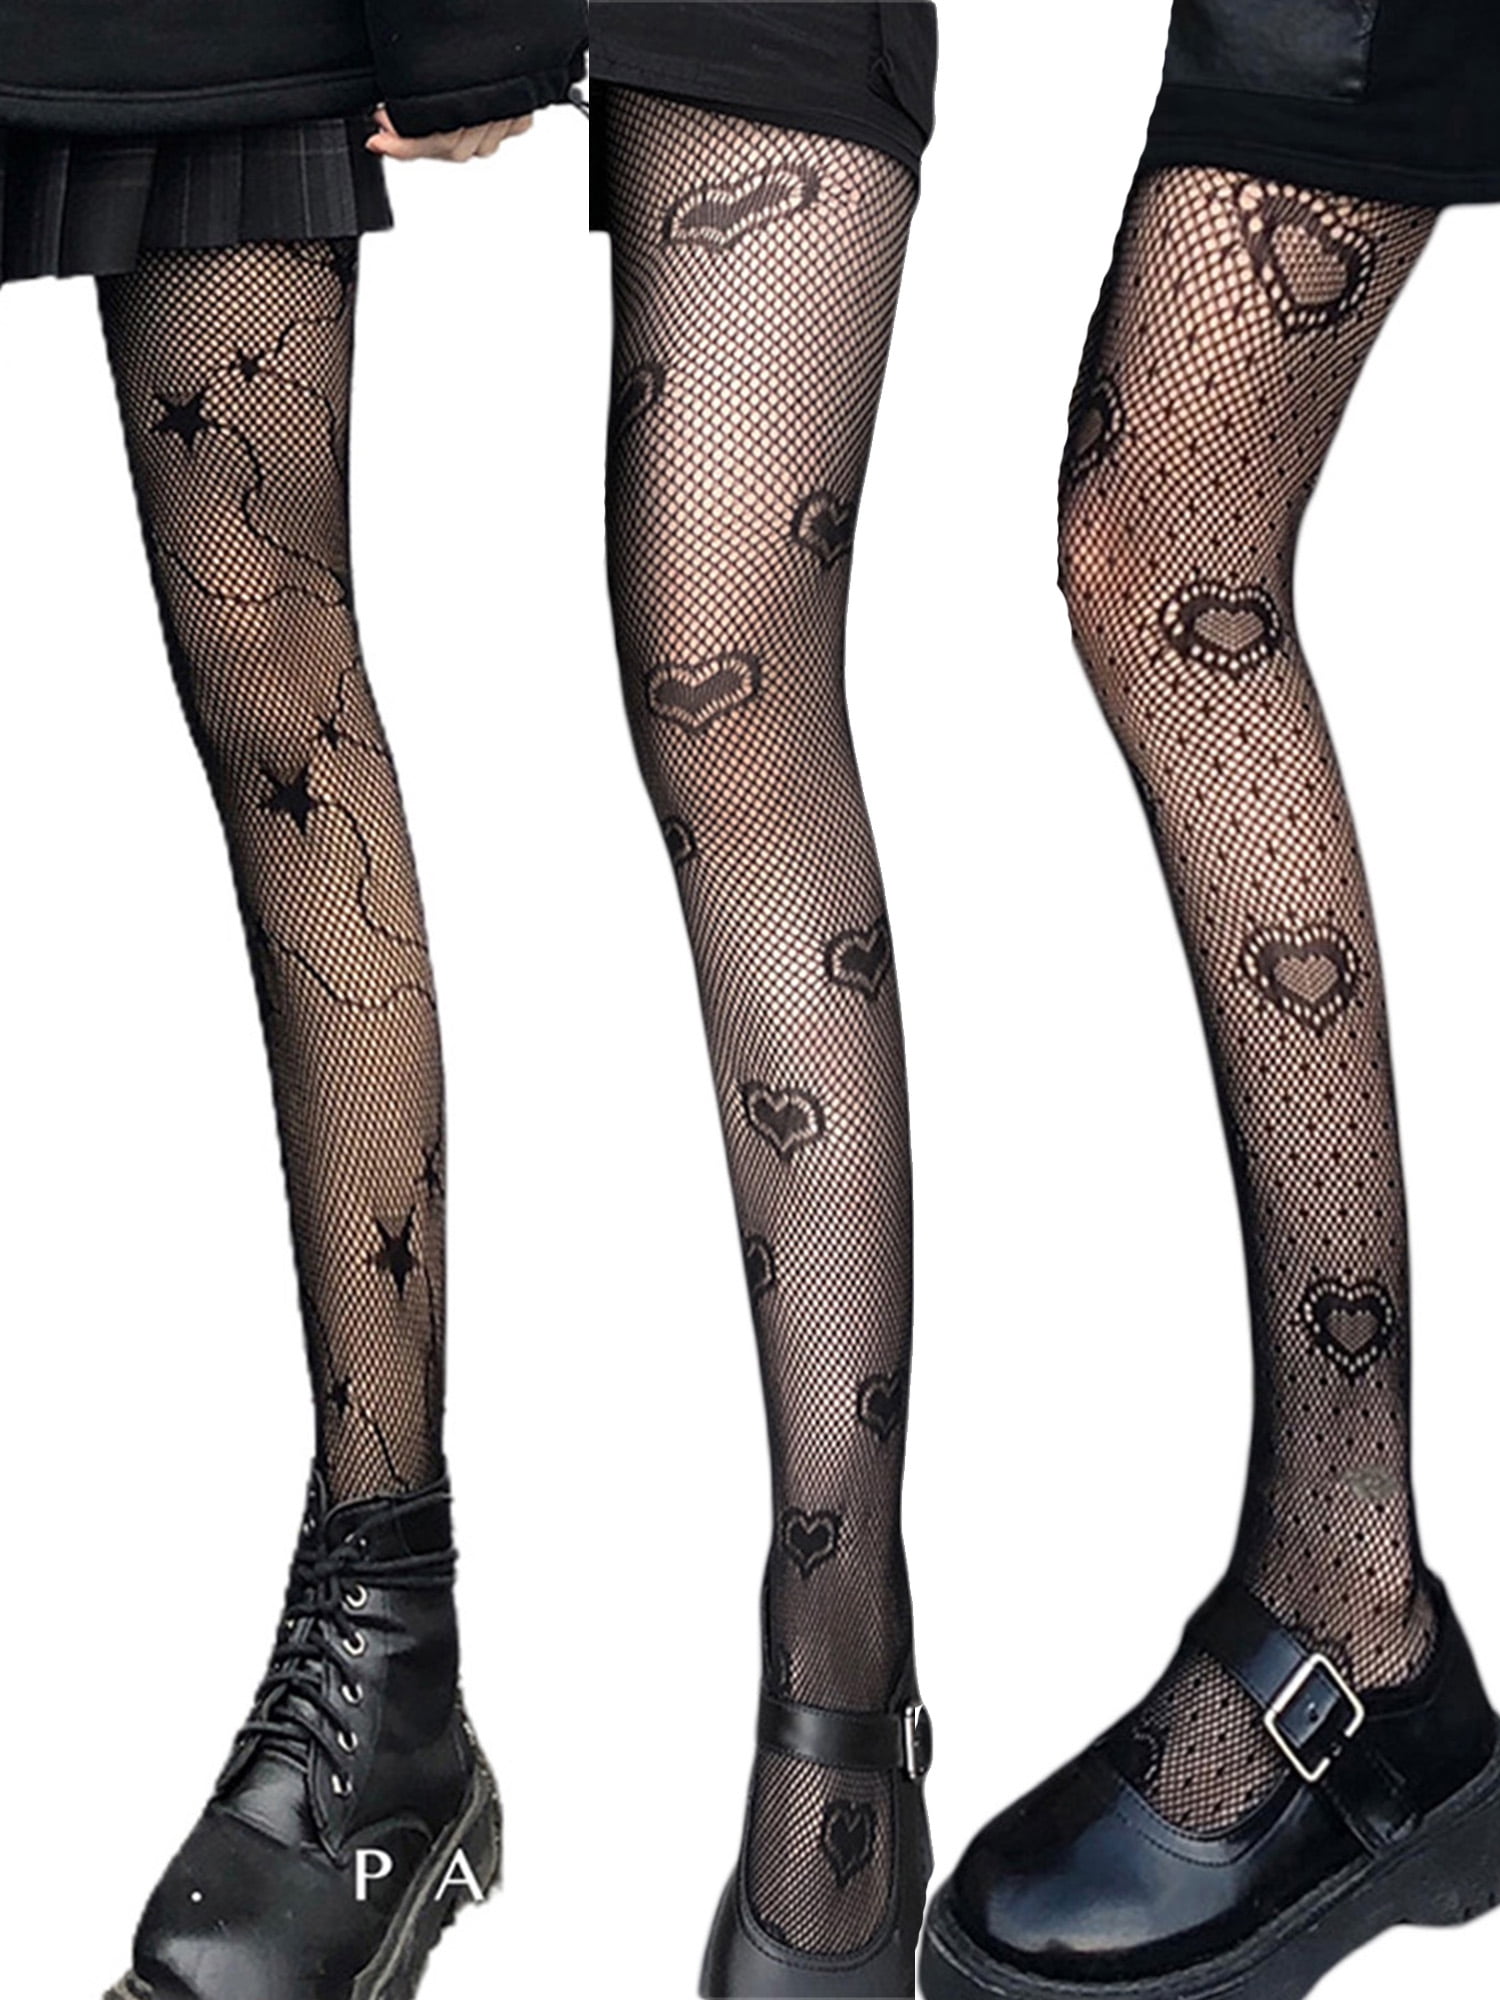 Jbeelate Women Grunge Pattern Fishnets Tights for Sexy Pantyhose Stockings Gothic Mesh Heart Lace Party Leggings, Women's, Size: One size, Black